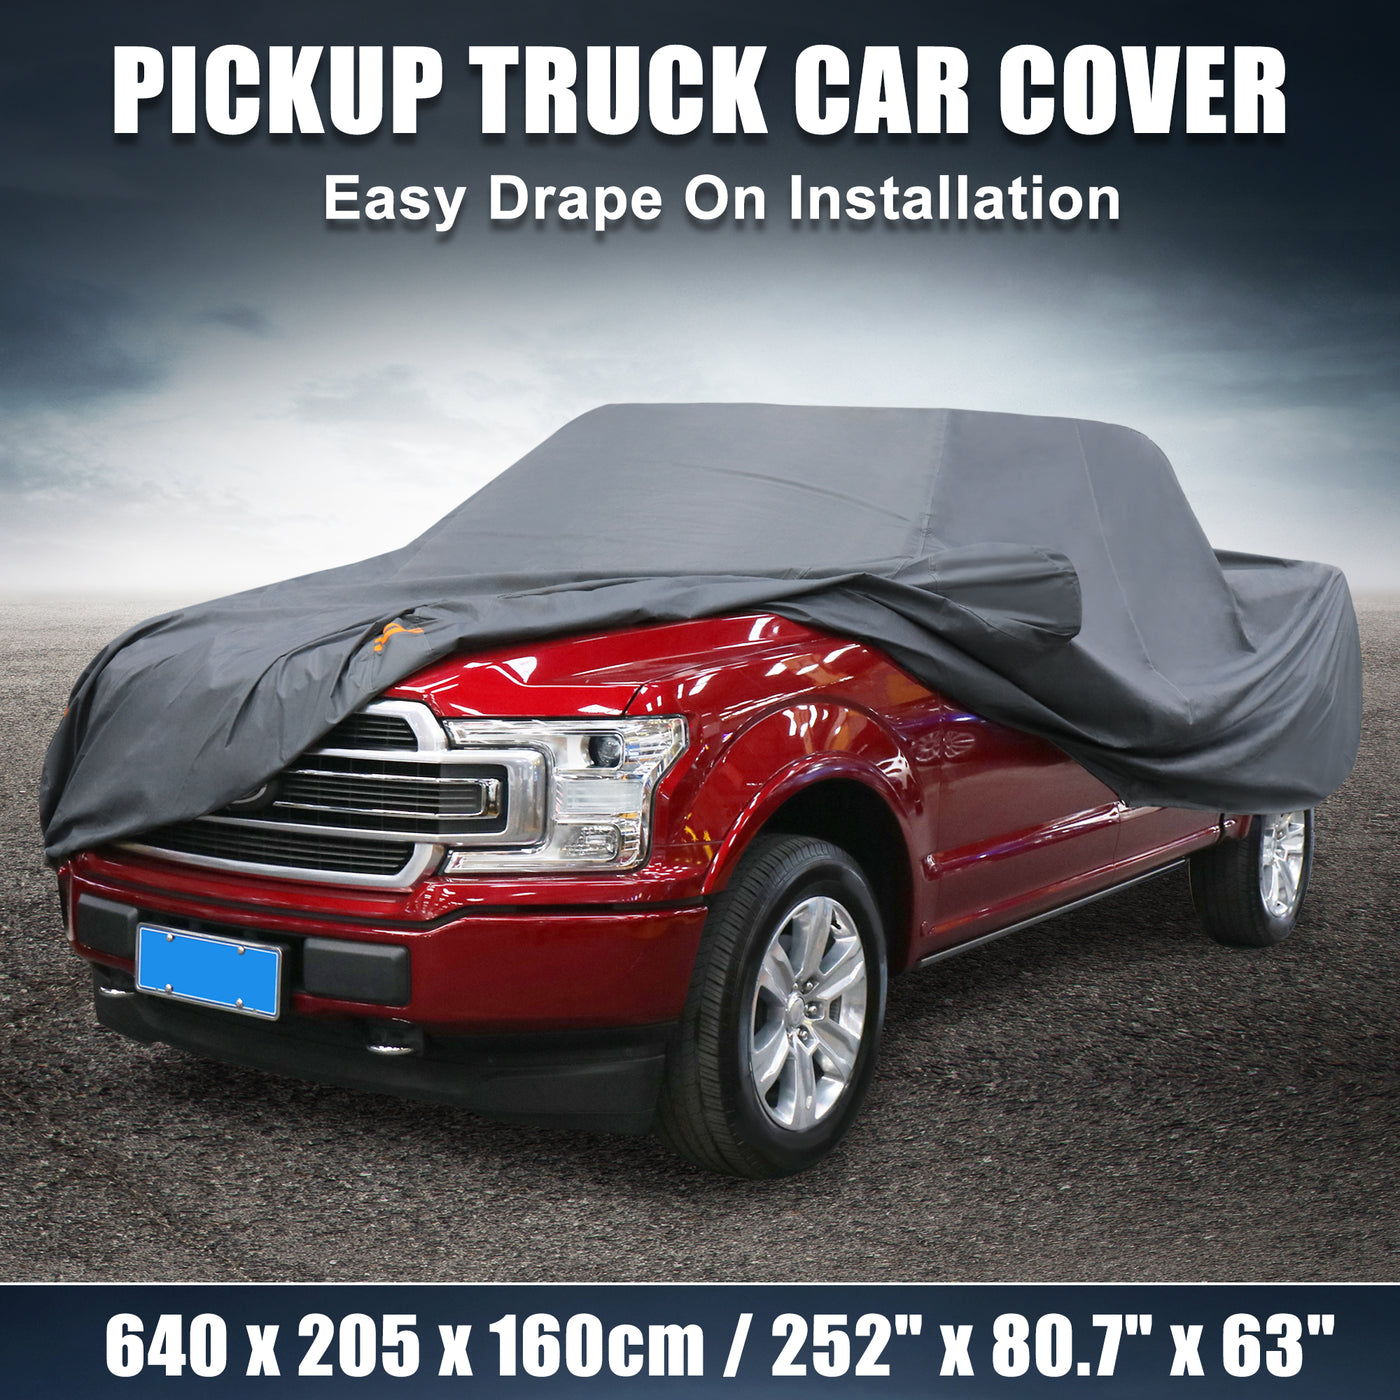 X AUTOHAUX Pickup Truck Car Cover for Ford F350 Crew Cab Short Bed 4 Door 08-21 for Ford f150 Extended Cab 8ft Bed 4 Door 04-21 Waterproof Sun  Protection PEVA with Driver Door Zipper Gray